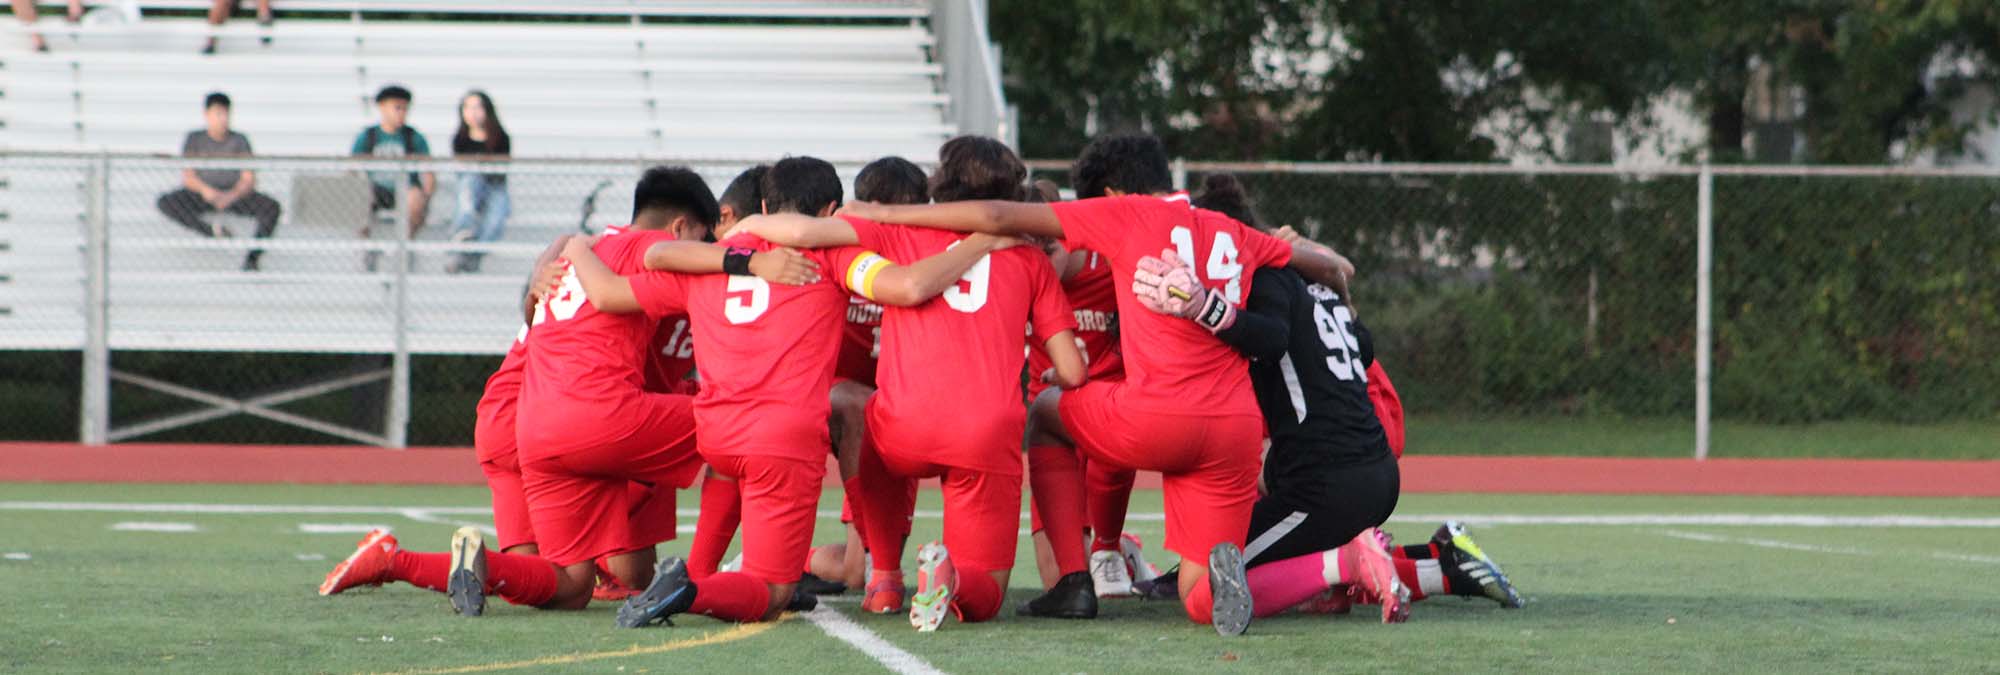 BBHS soccer players kneel in a circle on field